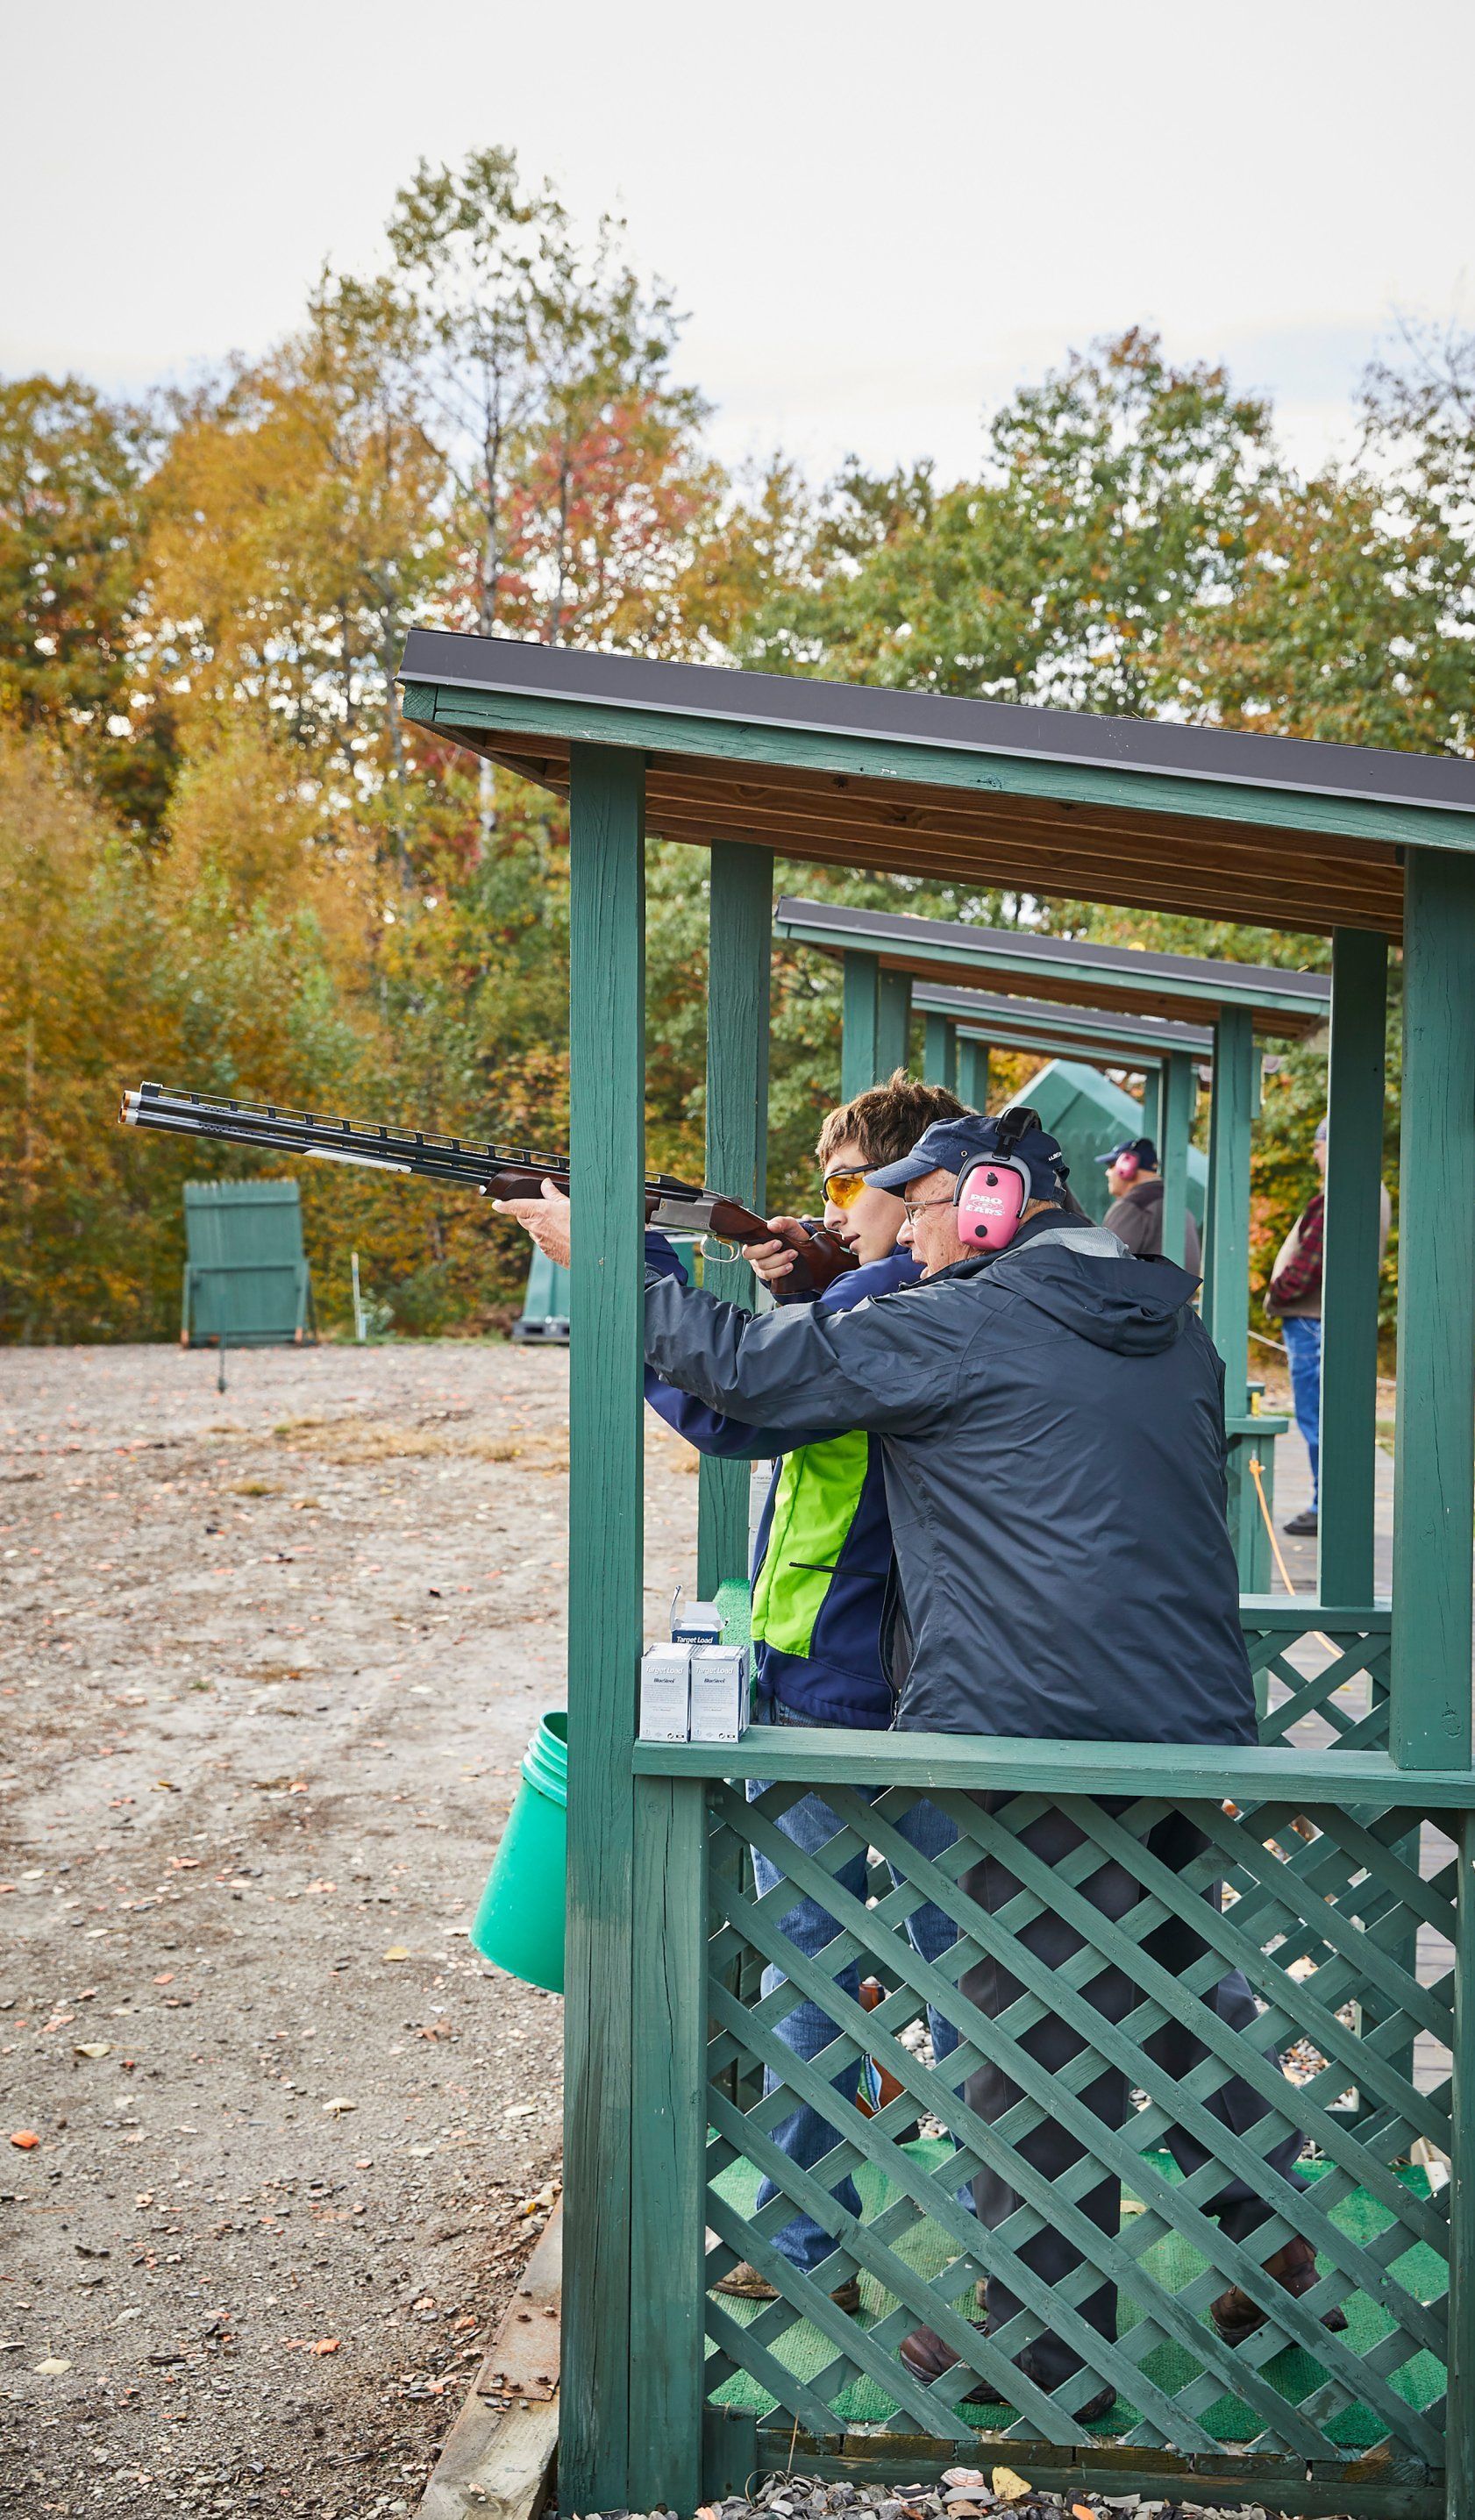 5-stand sporting clays course at L.L.Bean in Freeport, Maine.